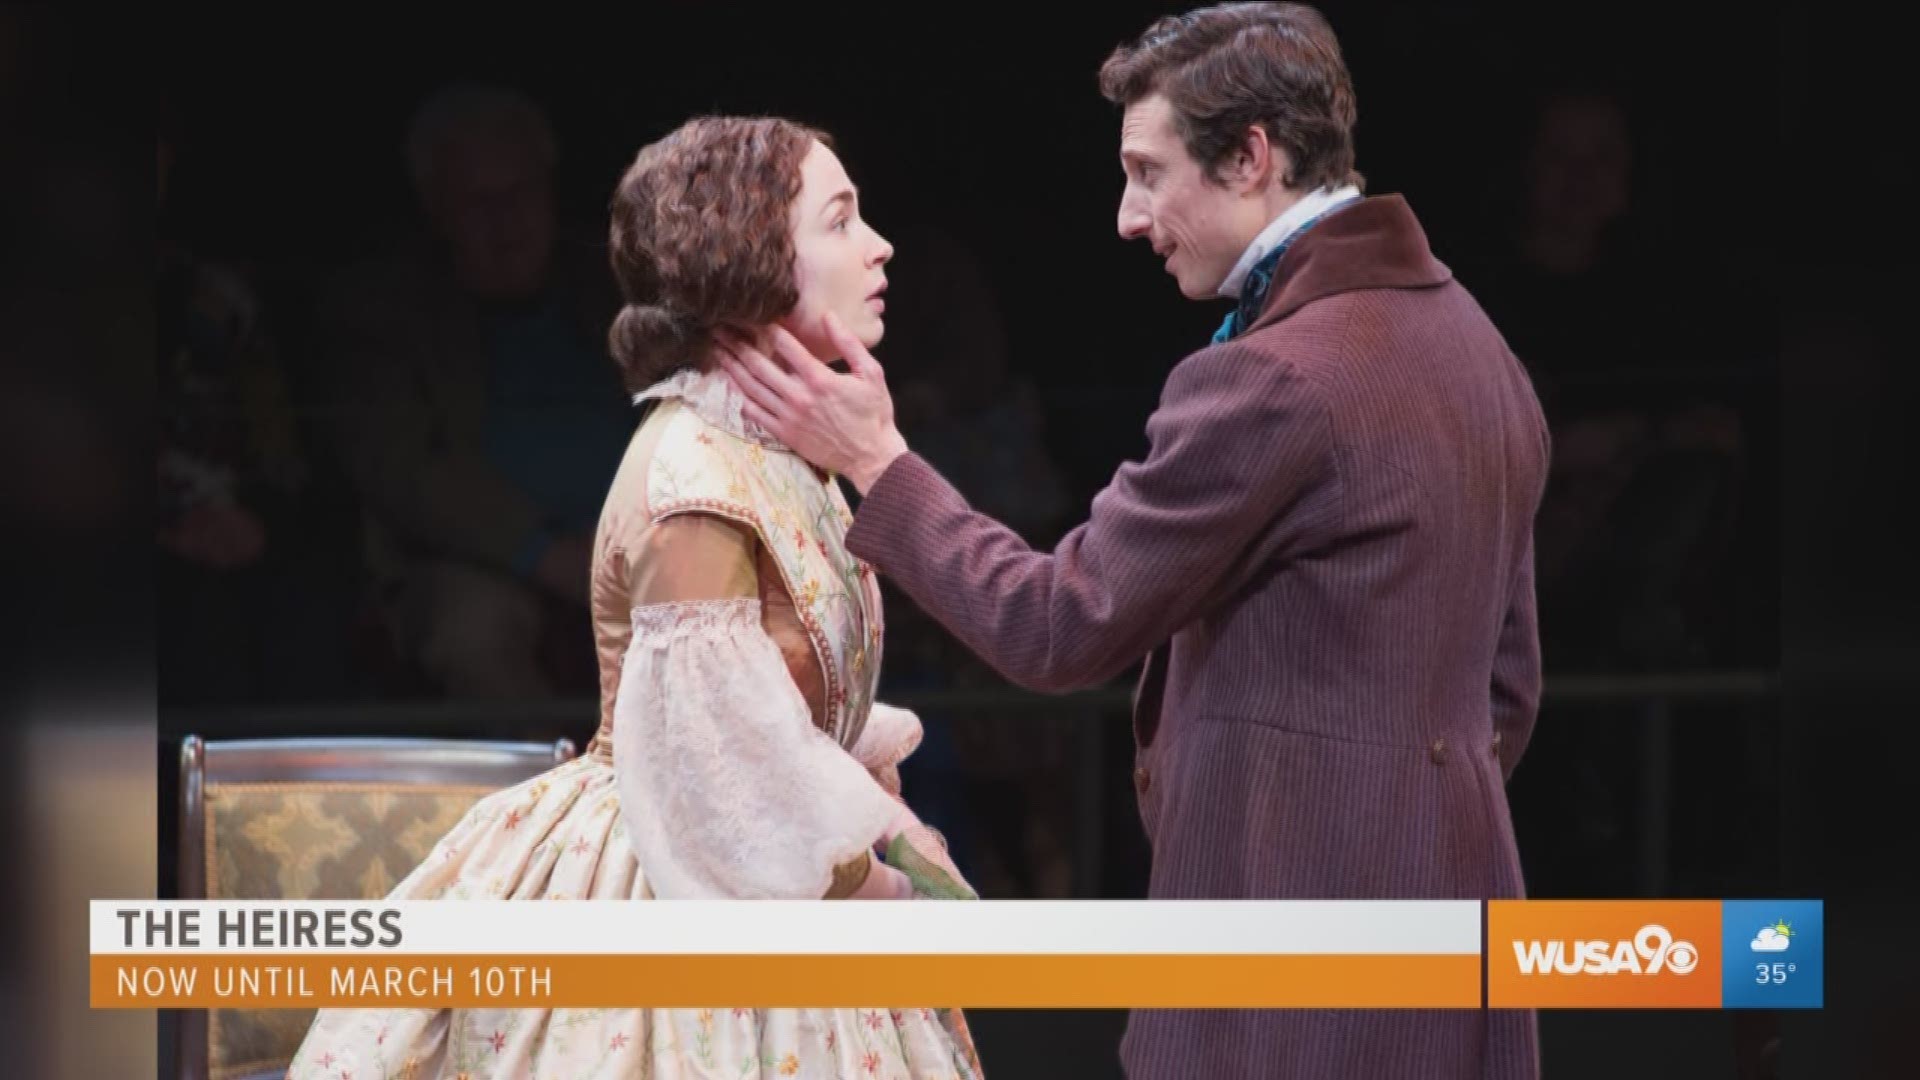 Since 'The Heiress' is set in the 1850's, costumes play a huge role in setting the stage for this melodrama. Listen to costume designer Ivania Stack talk about the inspiration behind the clothes. 'The Heiress' is playing now at Arena Stage till March 10. Visit www.arenastage.org for more information.